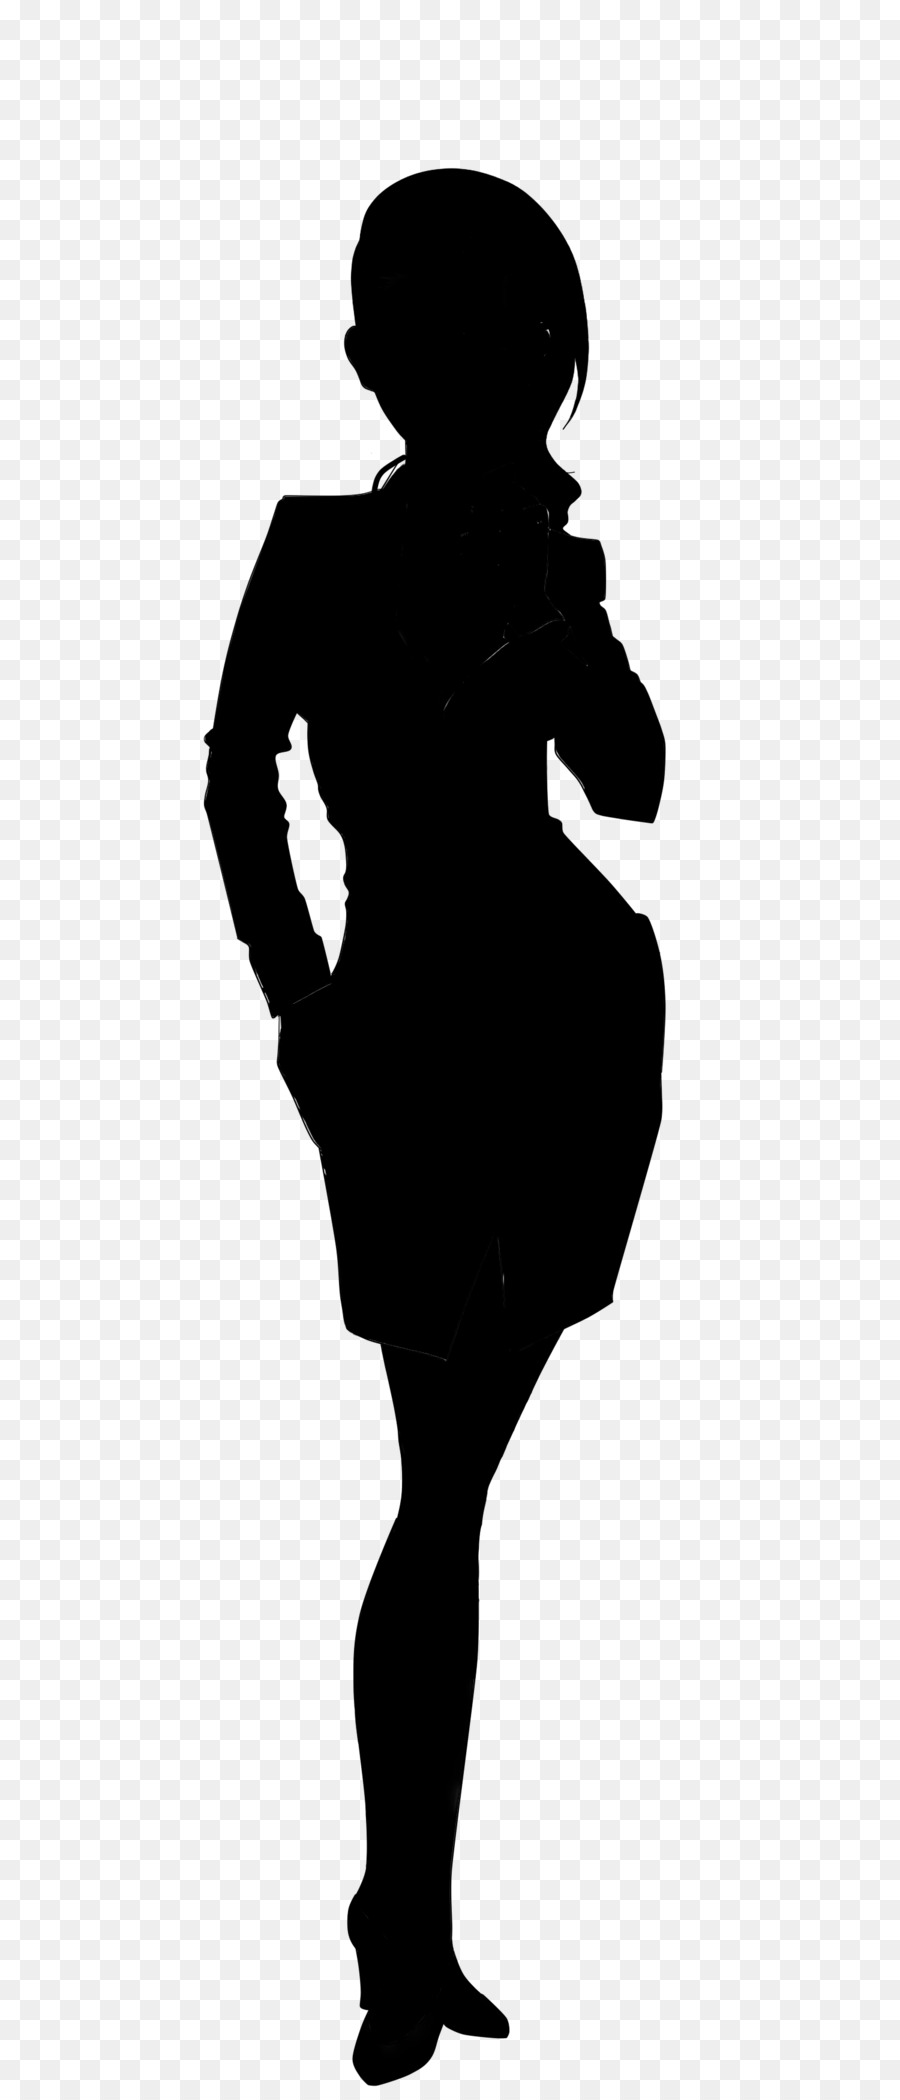 Silhouette Stock photography Image Vector graphics -  png download - 1500*3500 - Free Transparent Silhouette png Download.